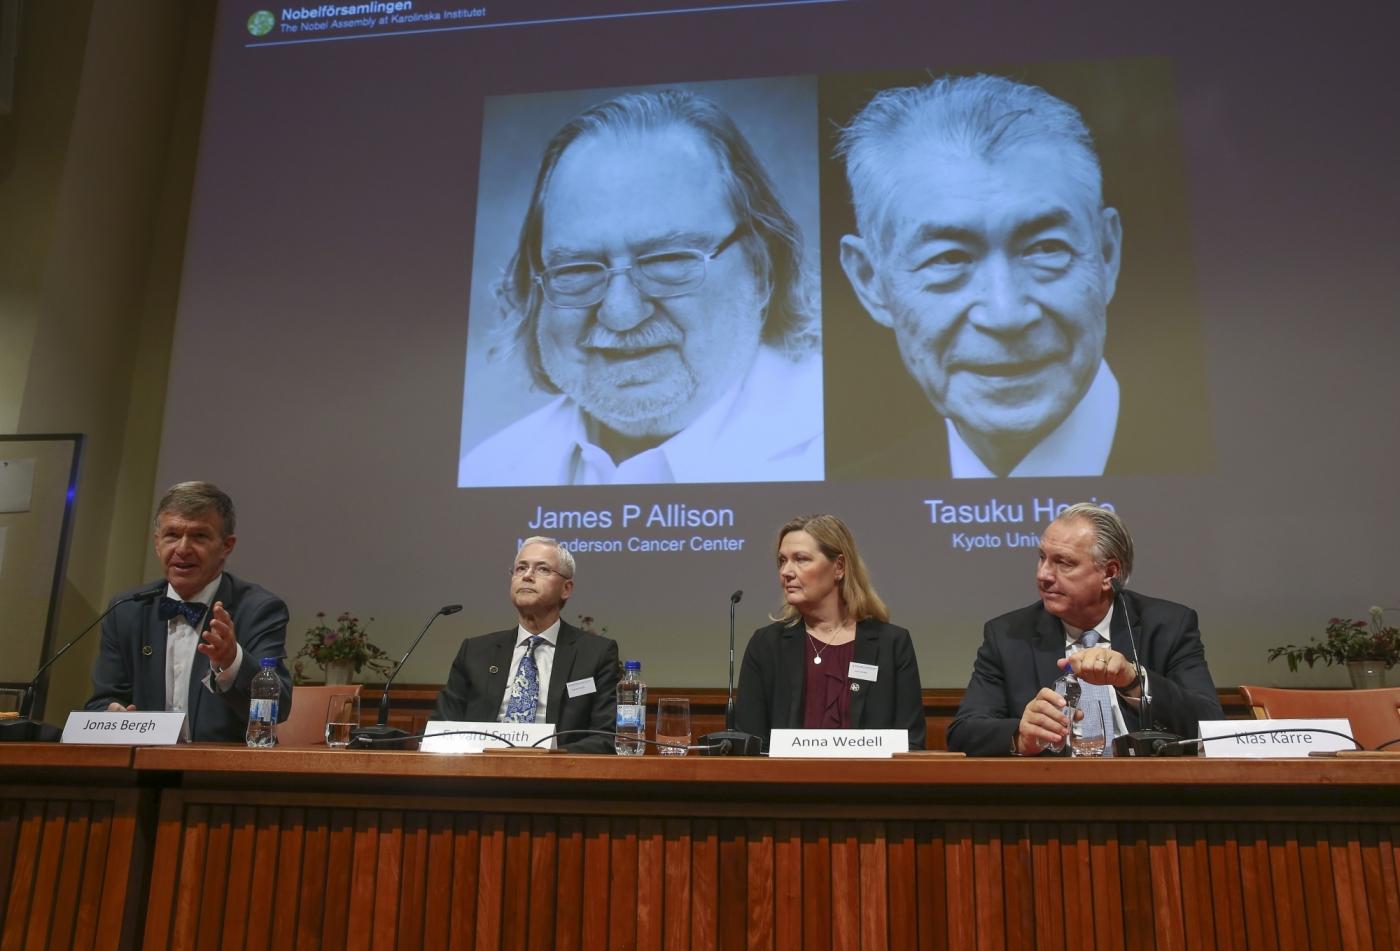 STOCKHOLM, Oct. 1, 2018 (Xinhua) -- Members of the Nobel Committee for Physiology or Medicine announce two scientists James P. Allison (L, screen) of U.S. and Tasuku Honjo (R, screen) of Japan share 2018 Nobel Prize in Physiology or Medicine during a press conference at the Karolinska Institute in Stockholm, Sweden, on Oct. 1, 2018. The Nobel assembly at the Karolinska Institute has decided to award the 2018 physiology or medicine prize jointly to James P. Allison and Tasuku Honjo for their discovery of cancer therapy by inhibition of negative immune regulation. (Xinhua/Ye Pingfan/IANS) by .